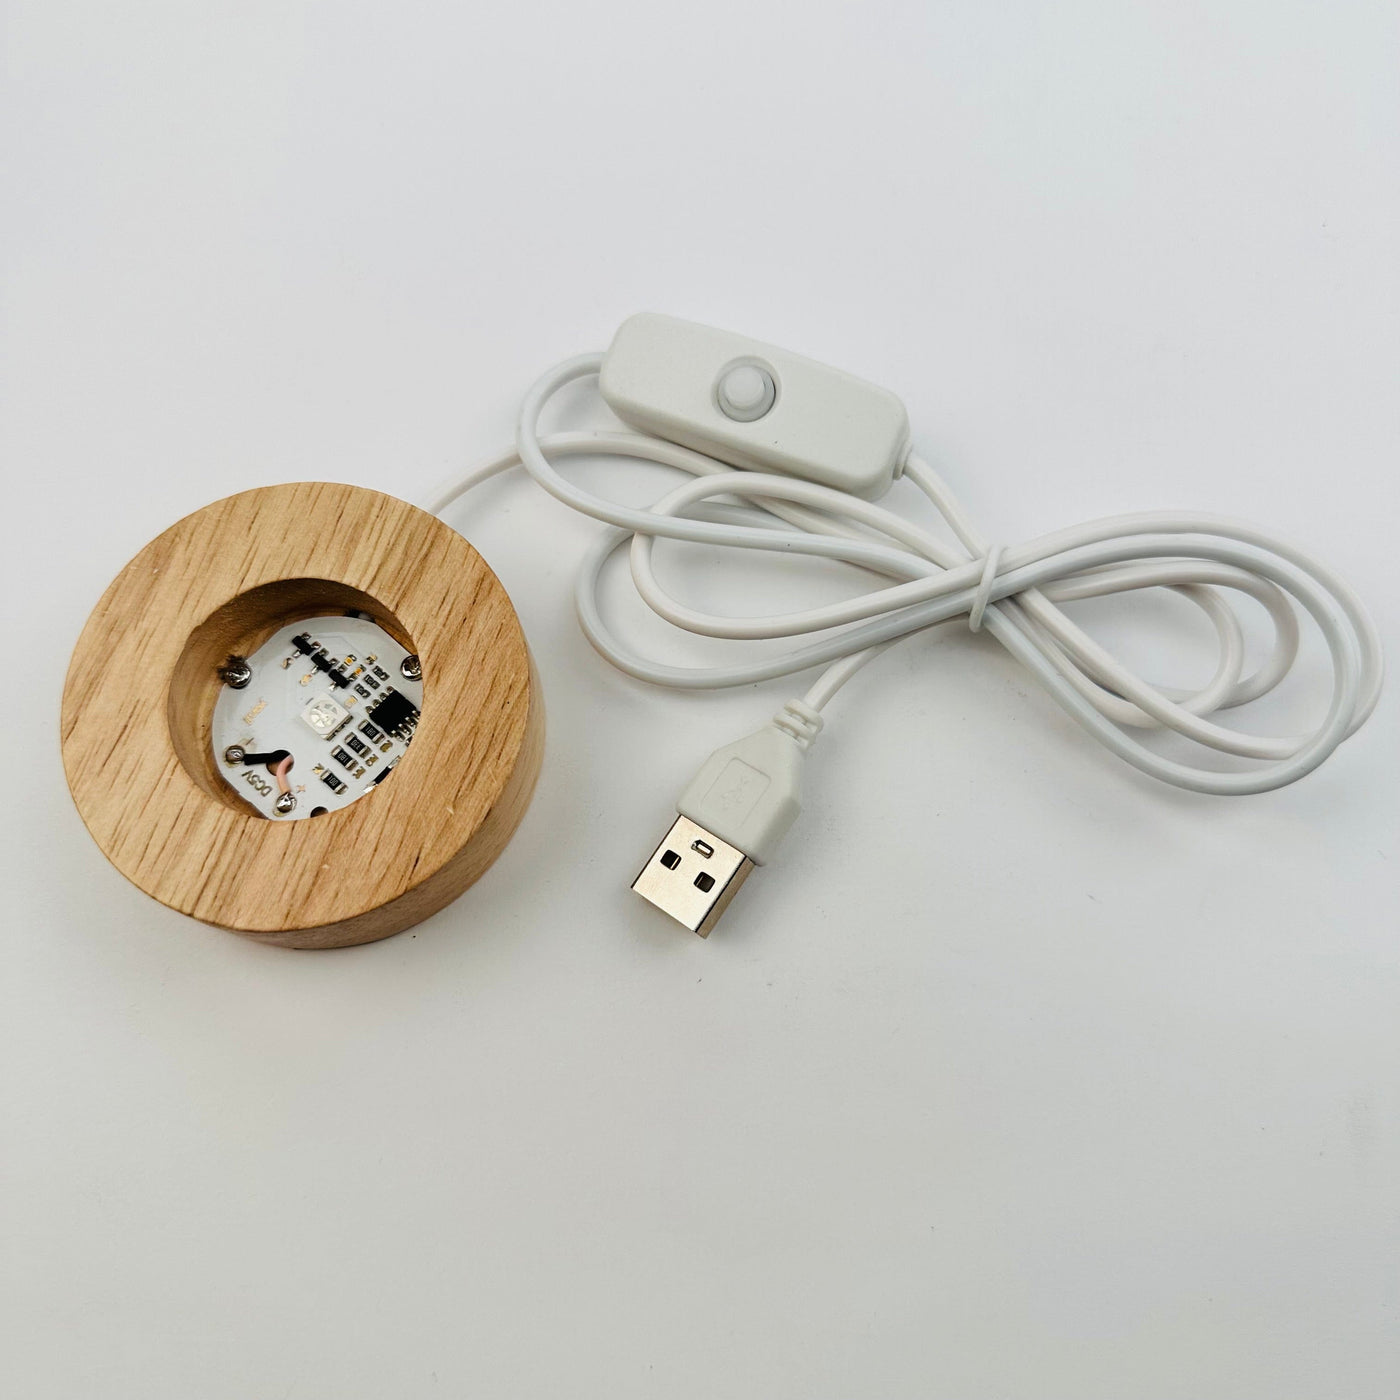 woodent stand comes with a USB cord and an on and off button